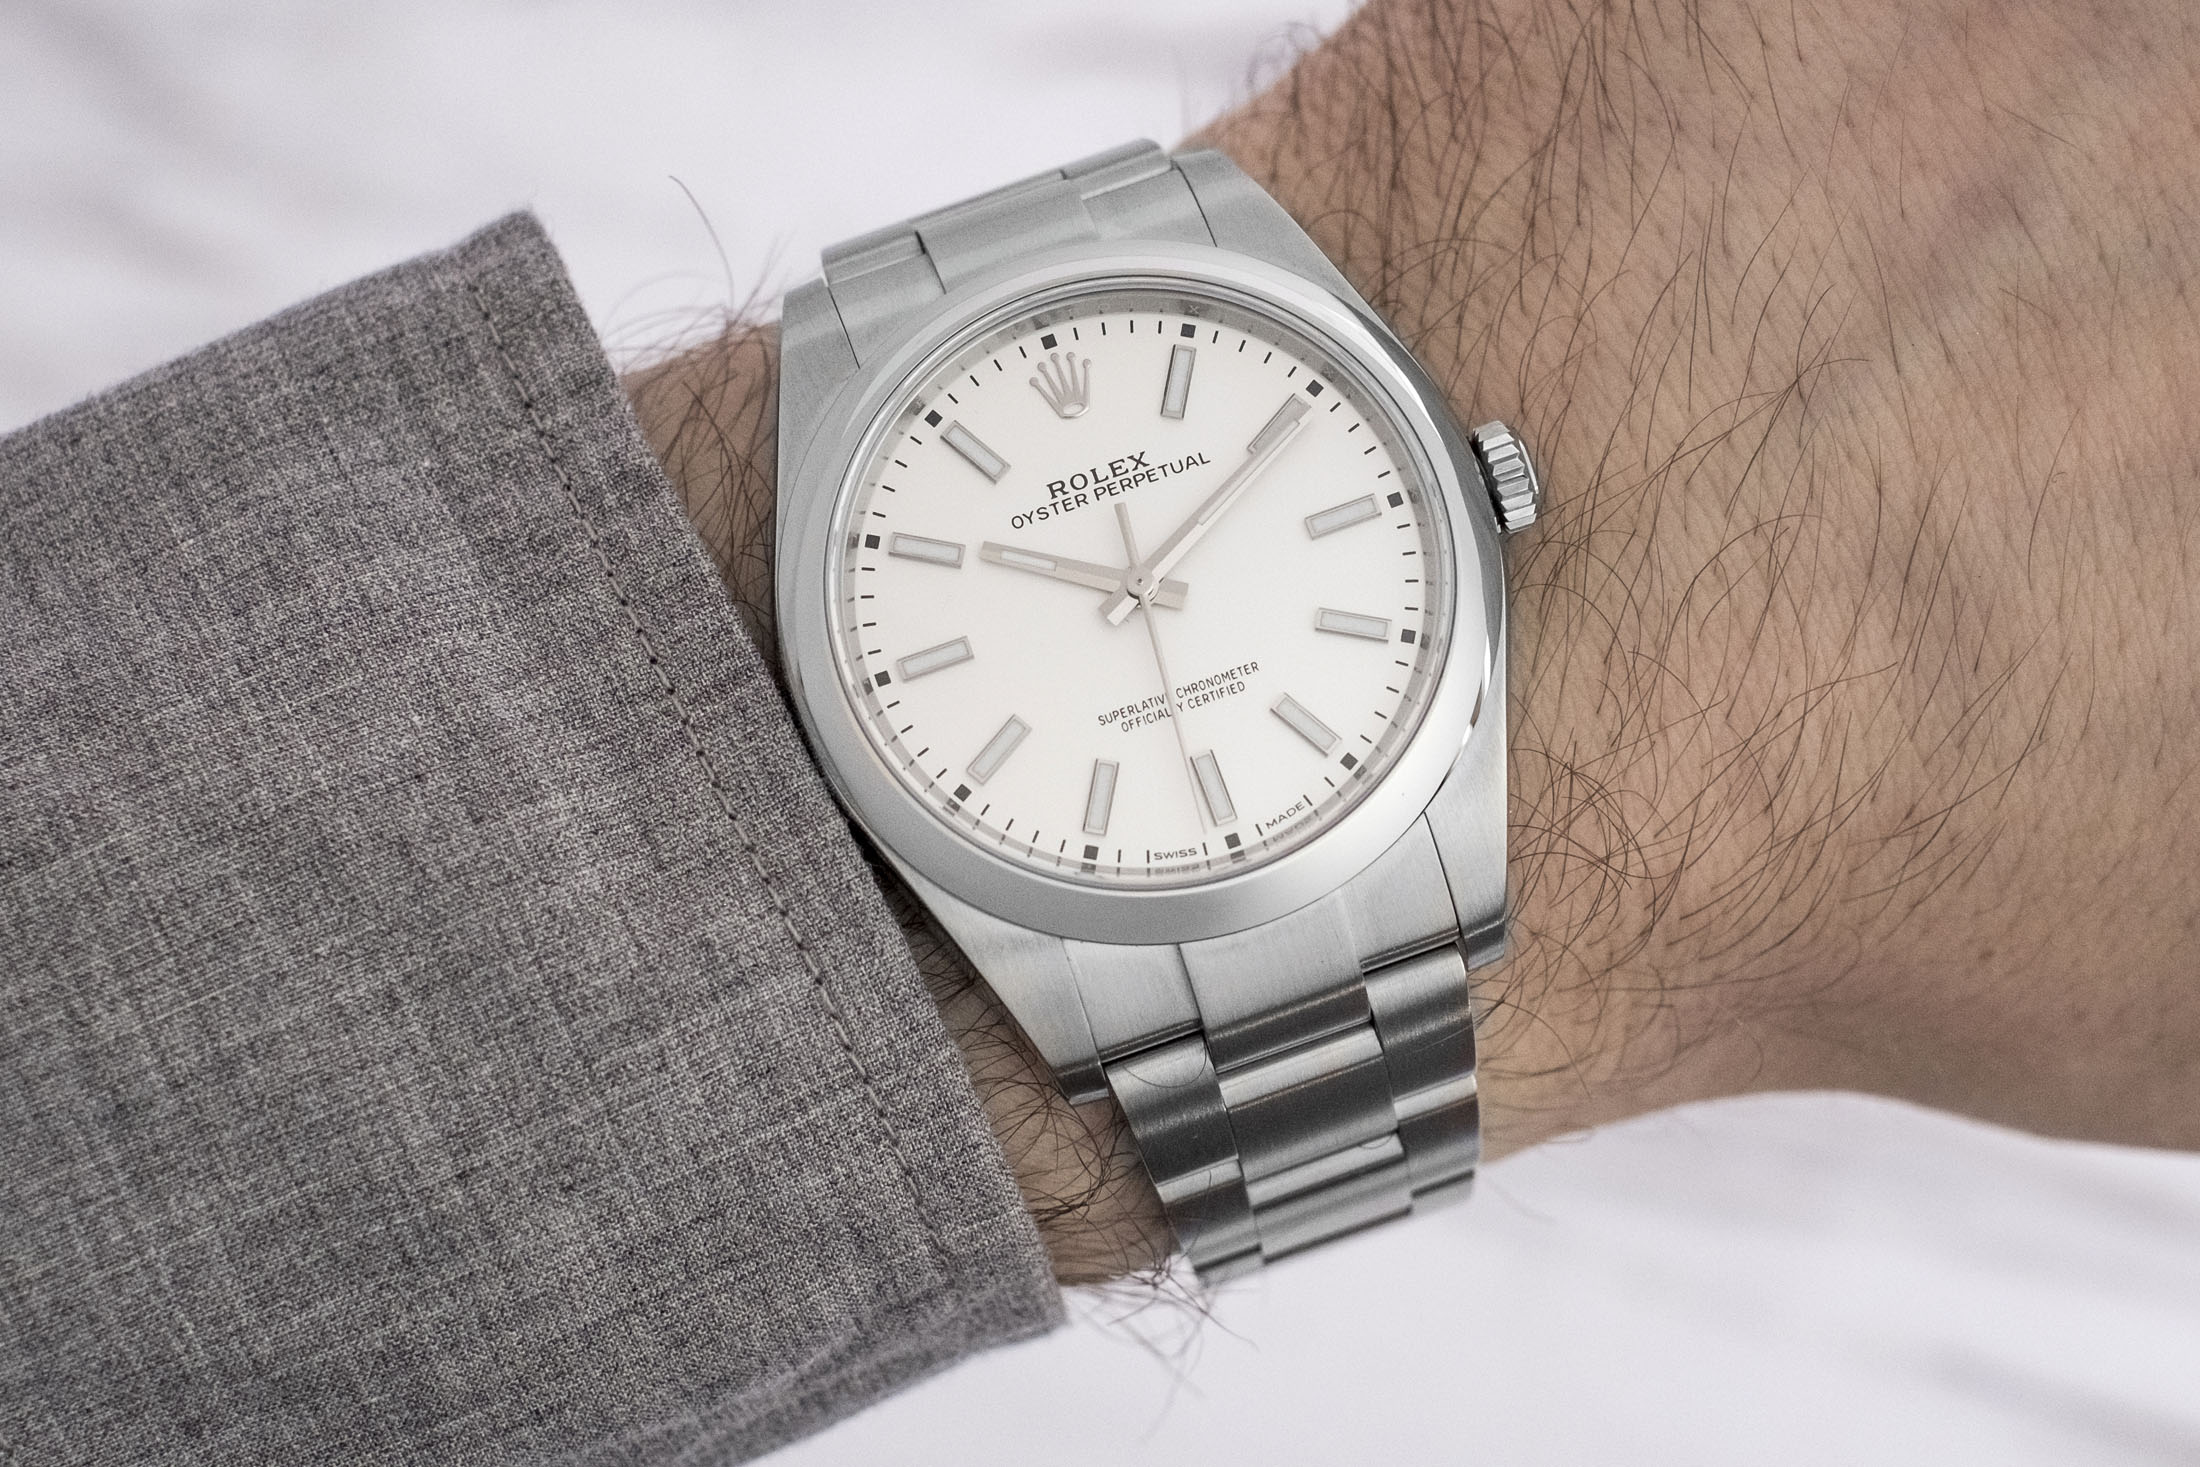 Hands-On: The Rolex Oyster Perpetual 